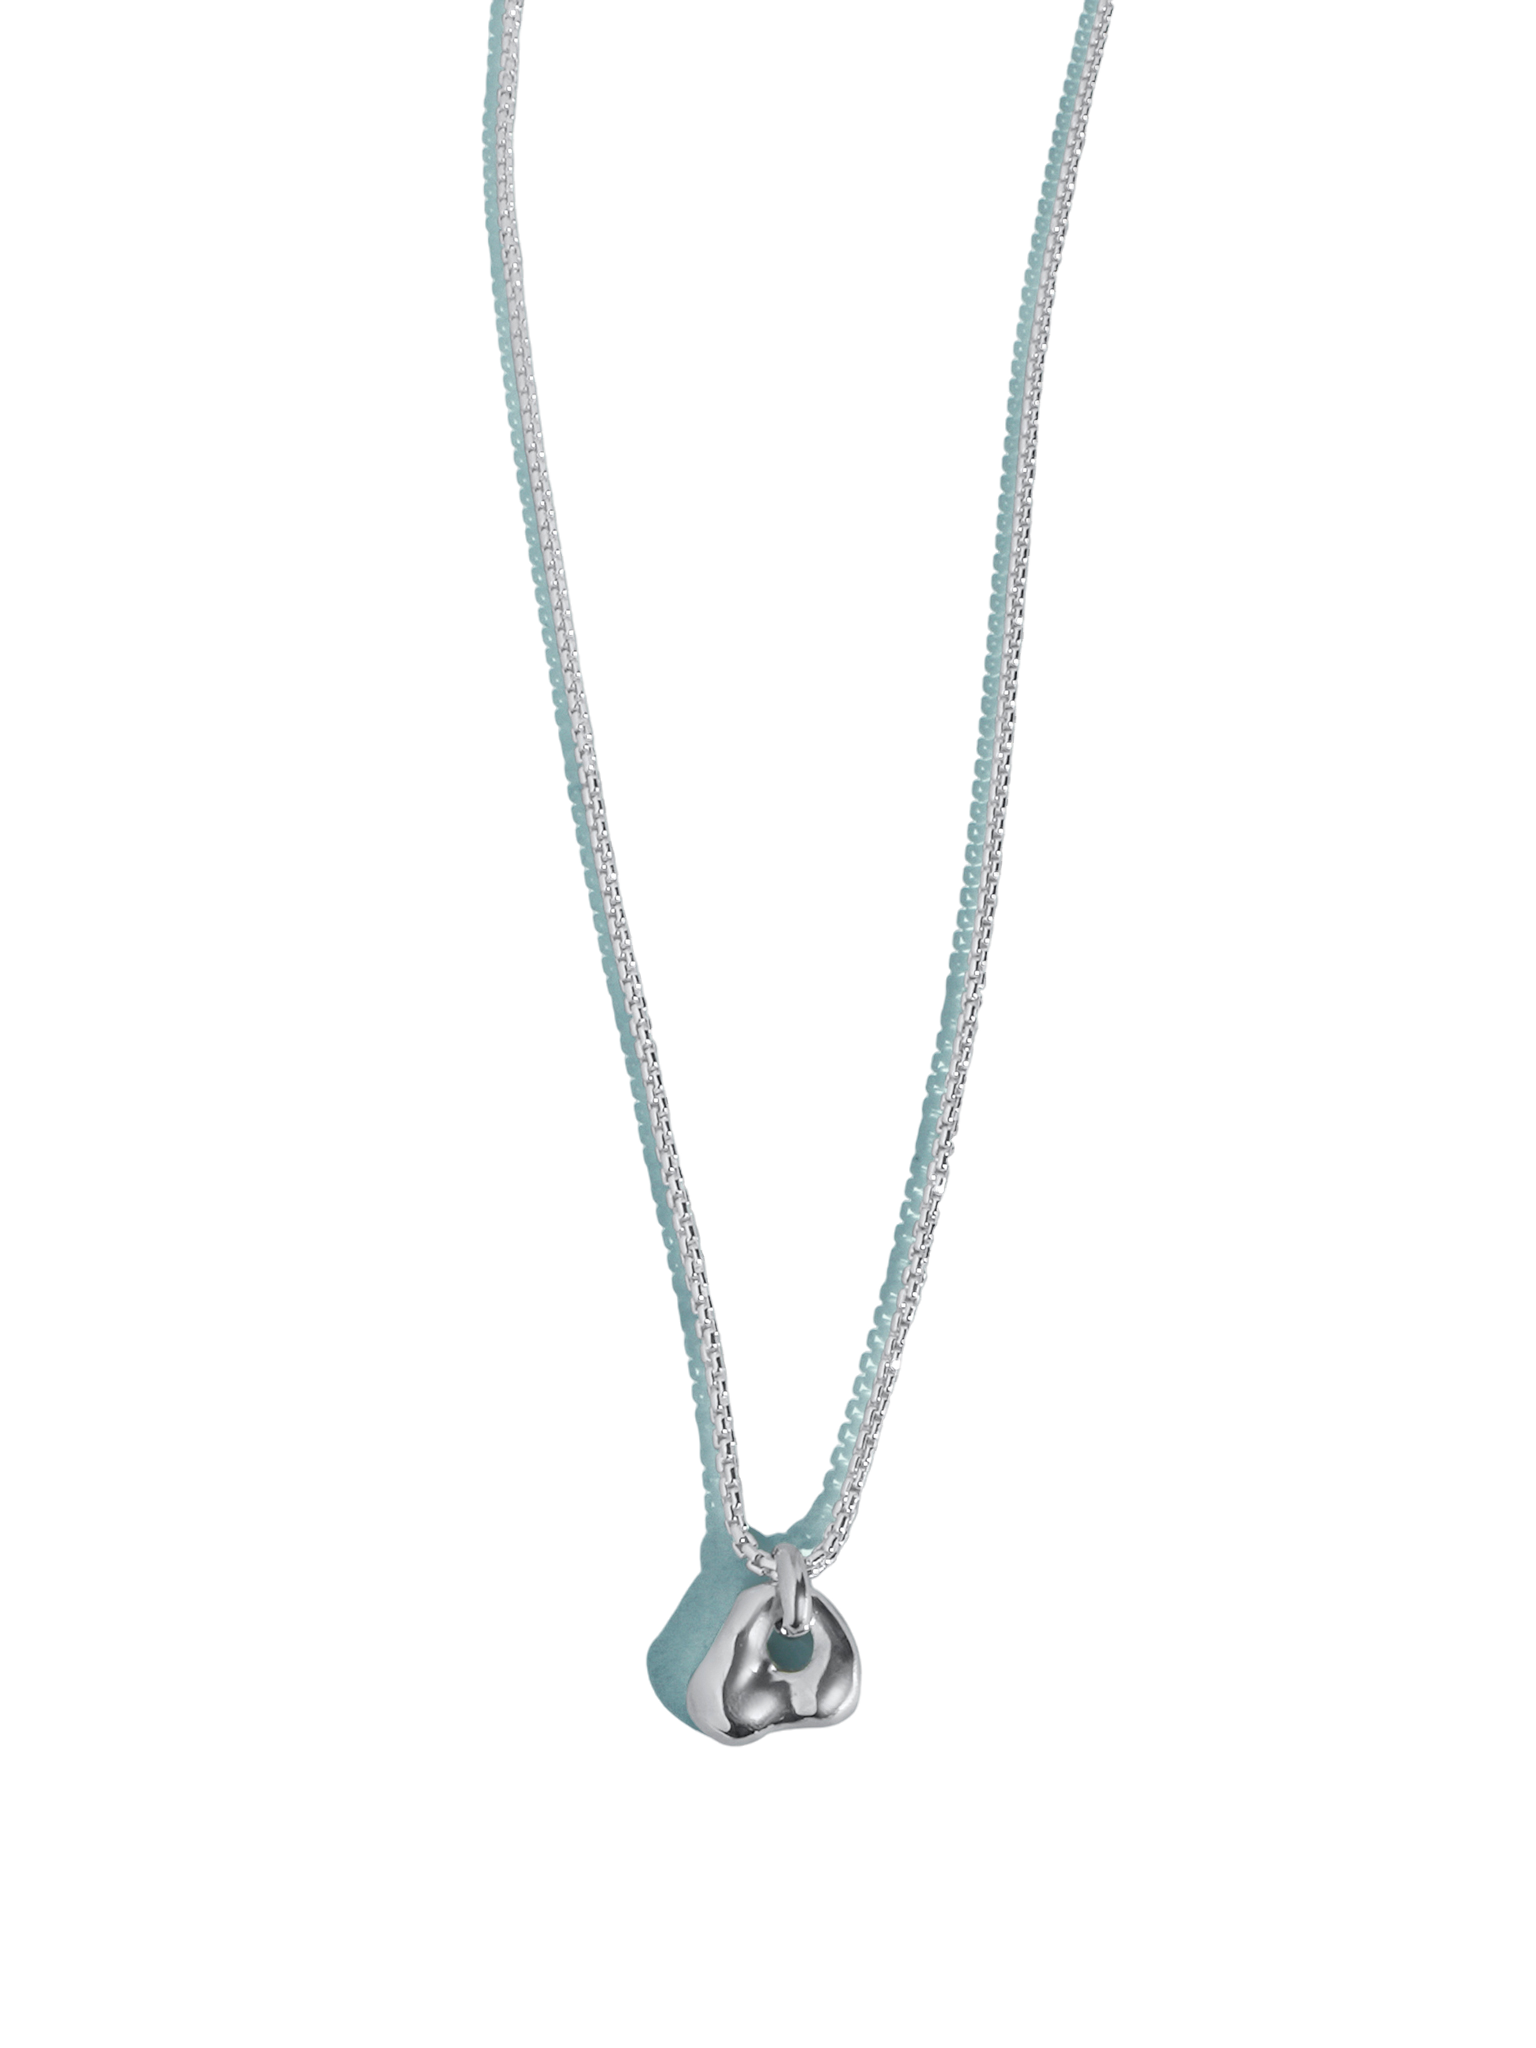 Fluvial necklace 